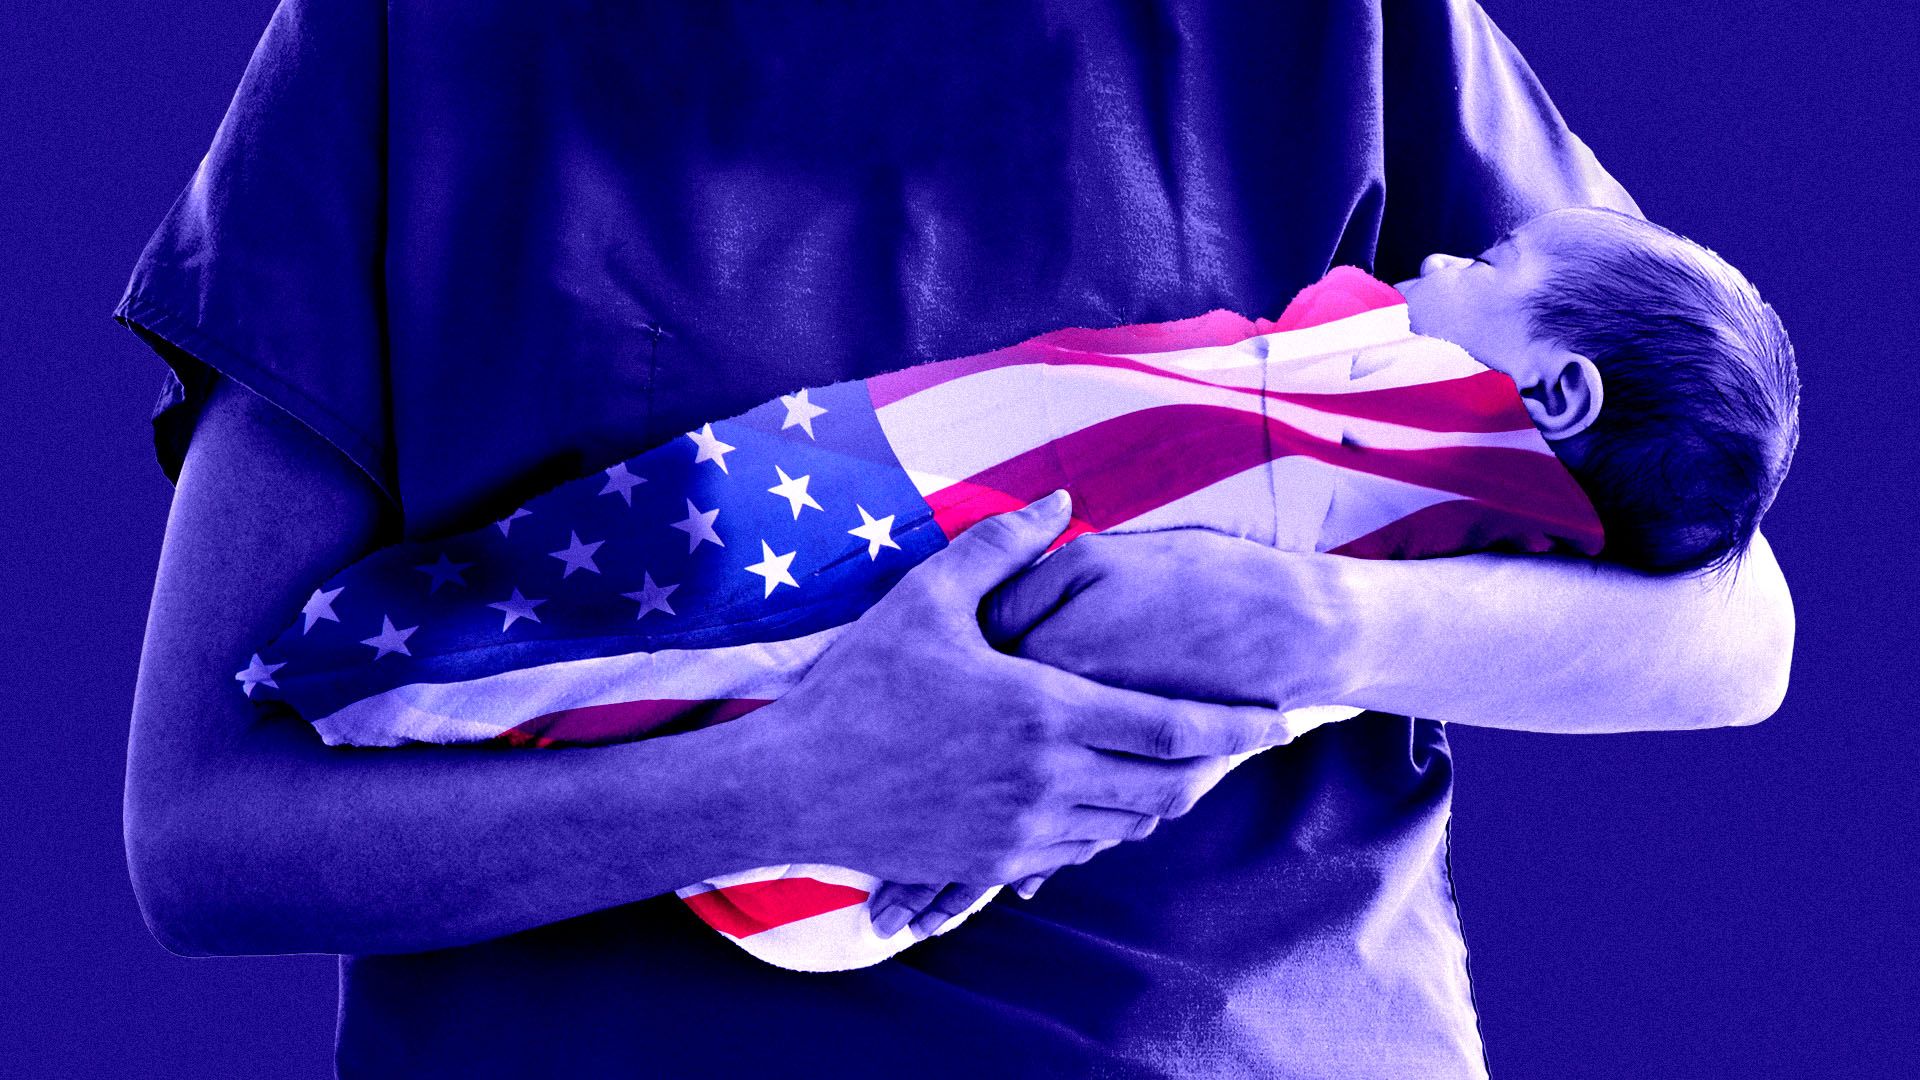 Illustration of a woman holding a baby wrapped in an American flag